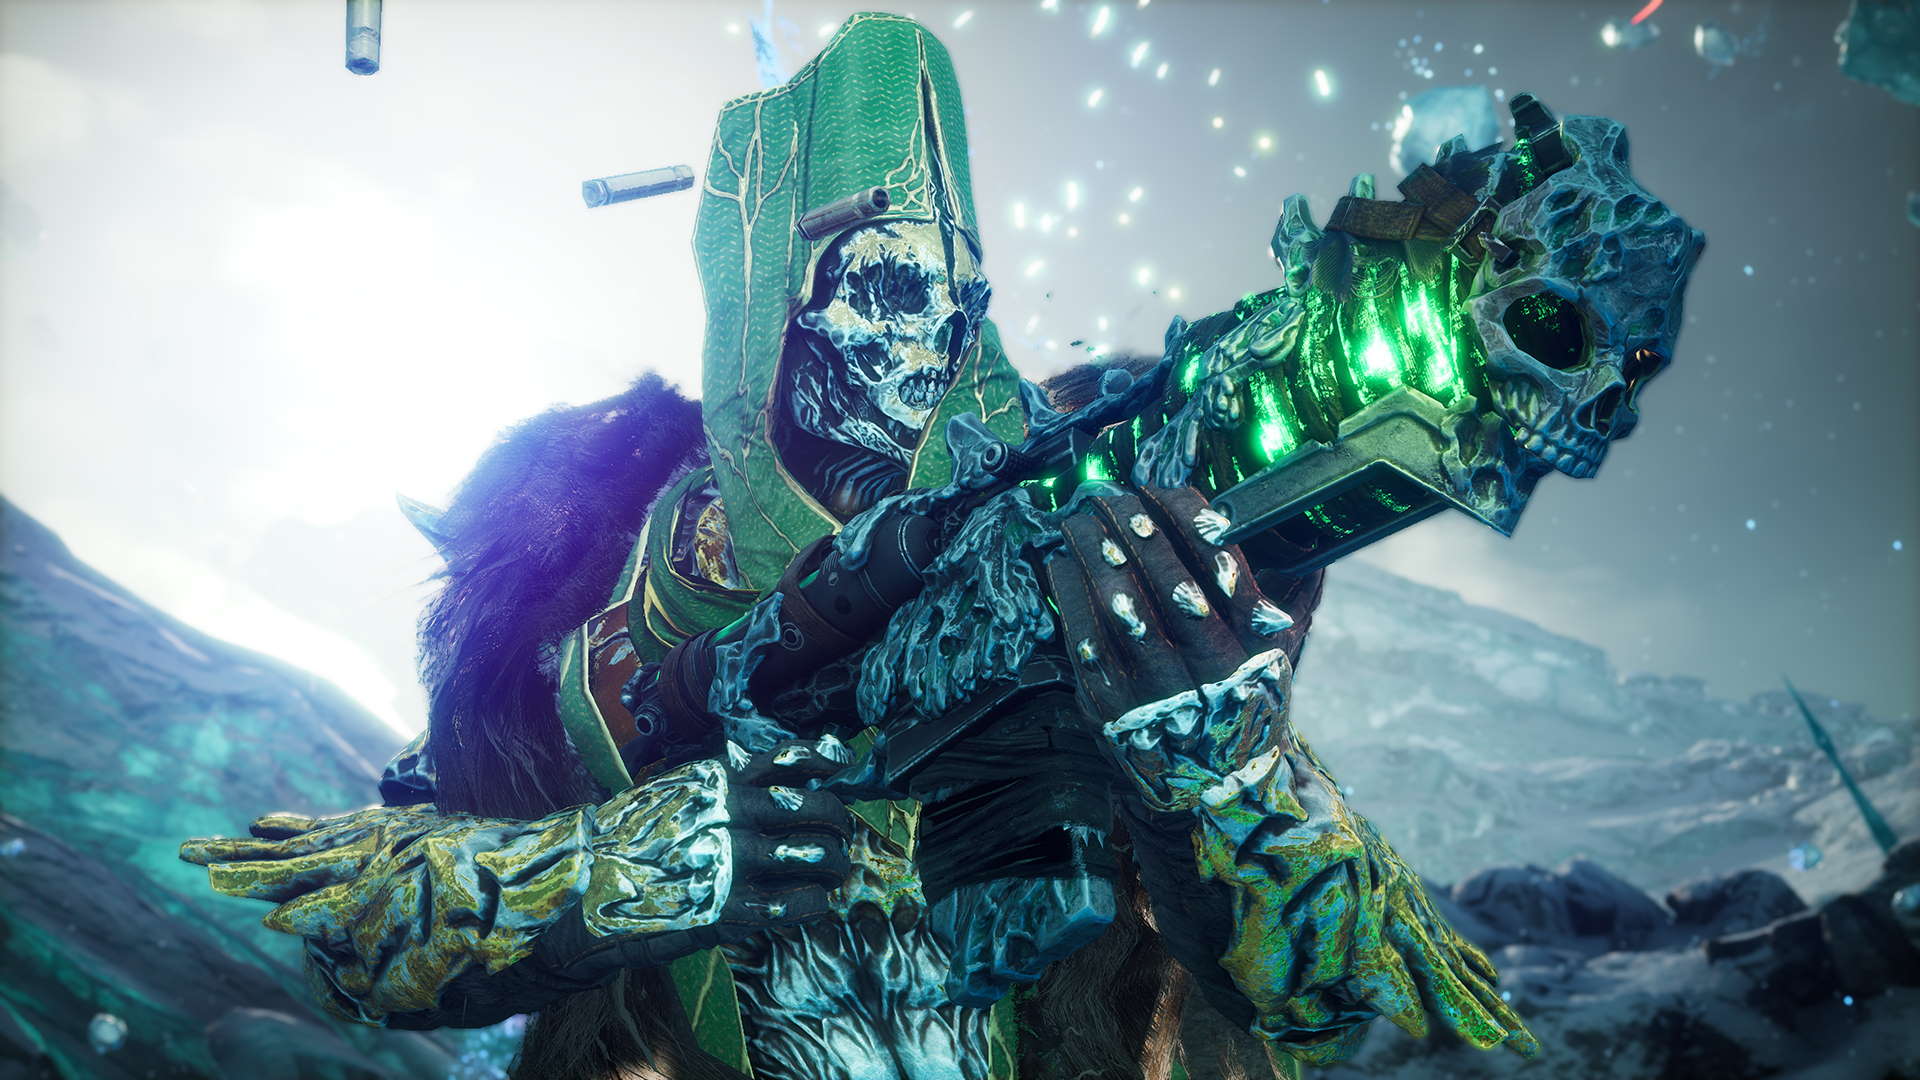 Take a look at Outriders Wordslayer's wildest, deadliest new weapons